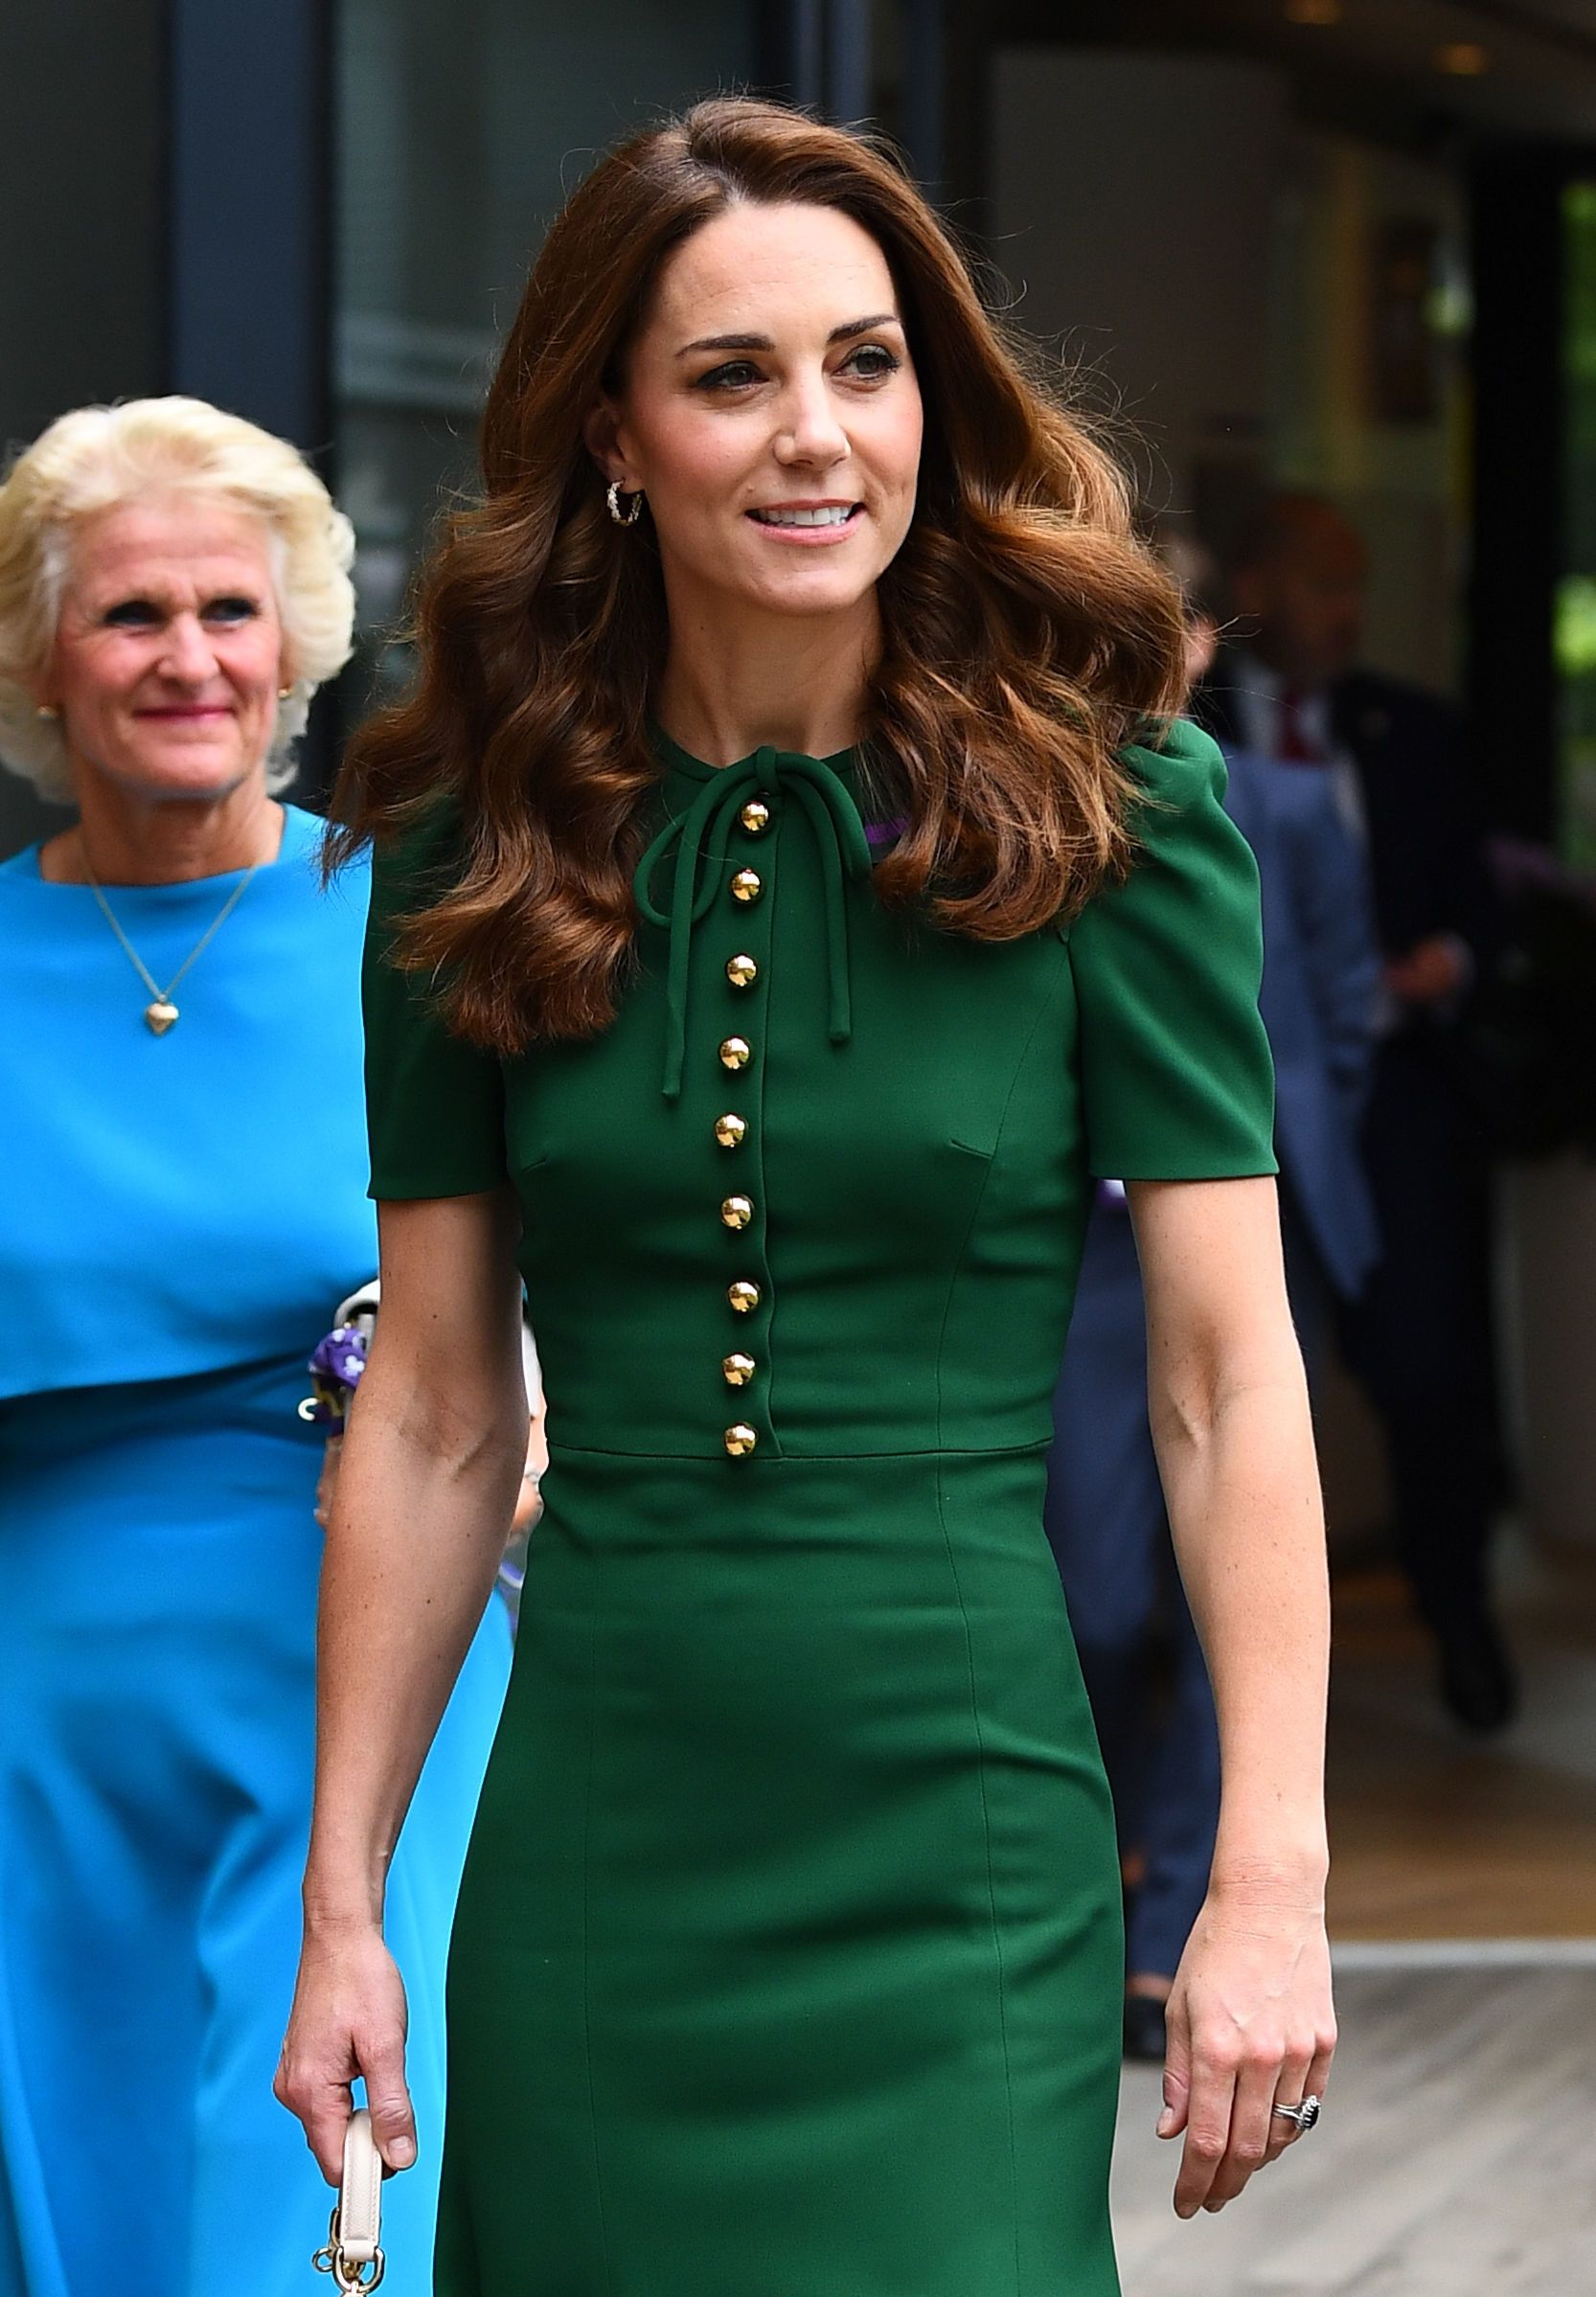 britains-catherine-duchess-of-cambridge-arrives-for-a-visit-news-photo-1155387993-1567680954.jpg